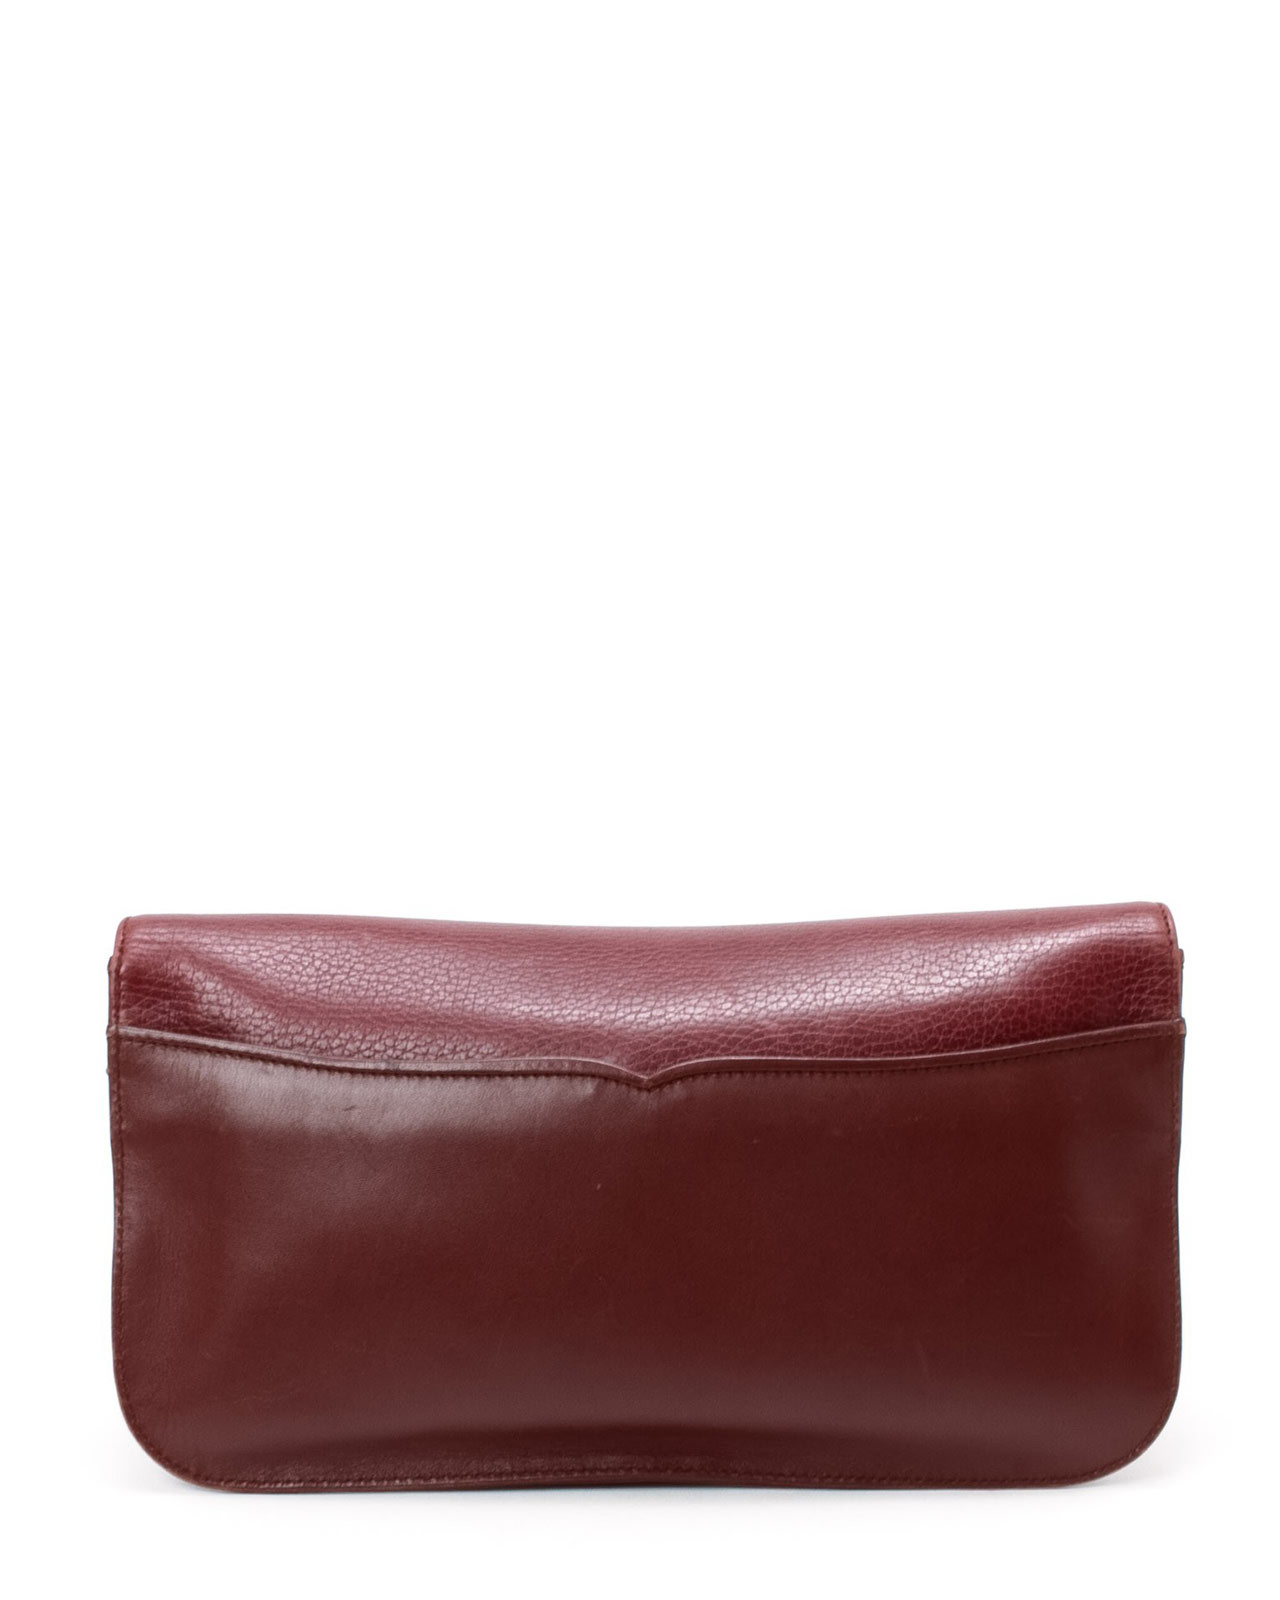 Lyst - Cartier Red Clutch Bag in Red